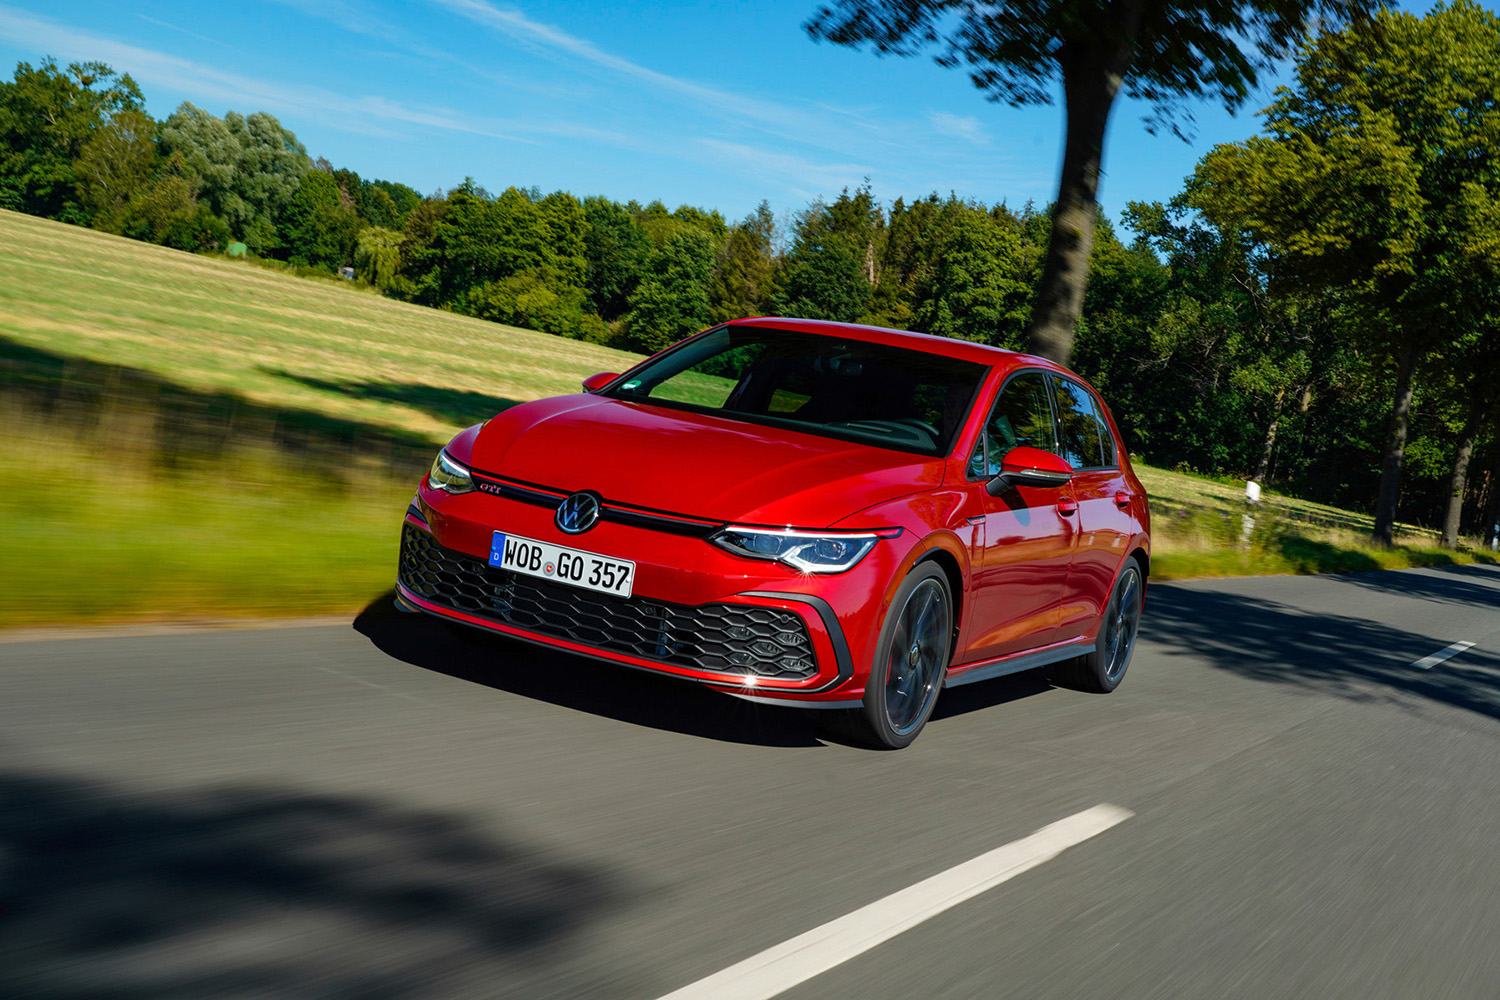 Red 2020 Volkswagen Golf GTI cruising past a grassy field in the sun, the best used compact car to buy